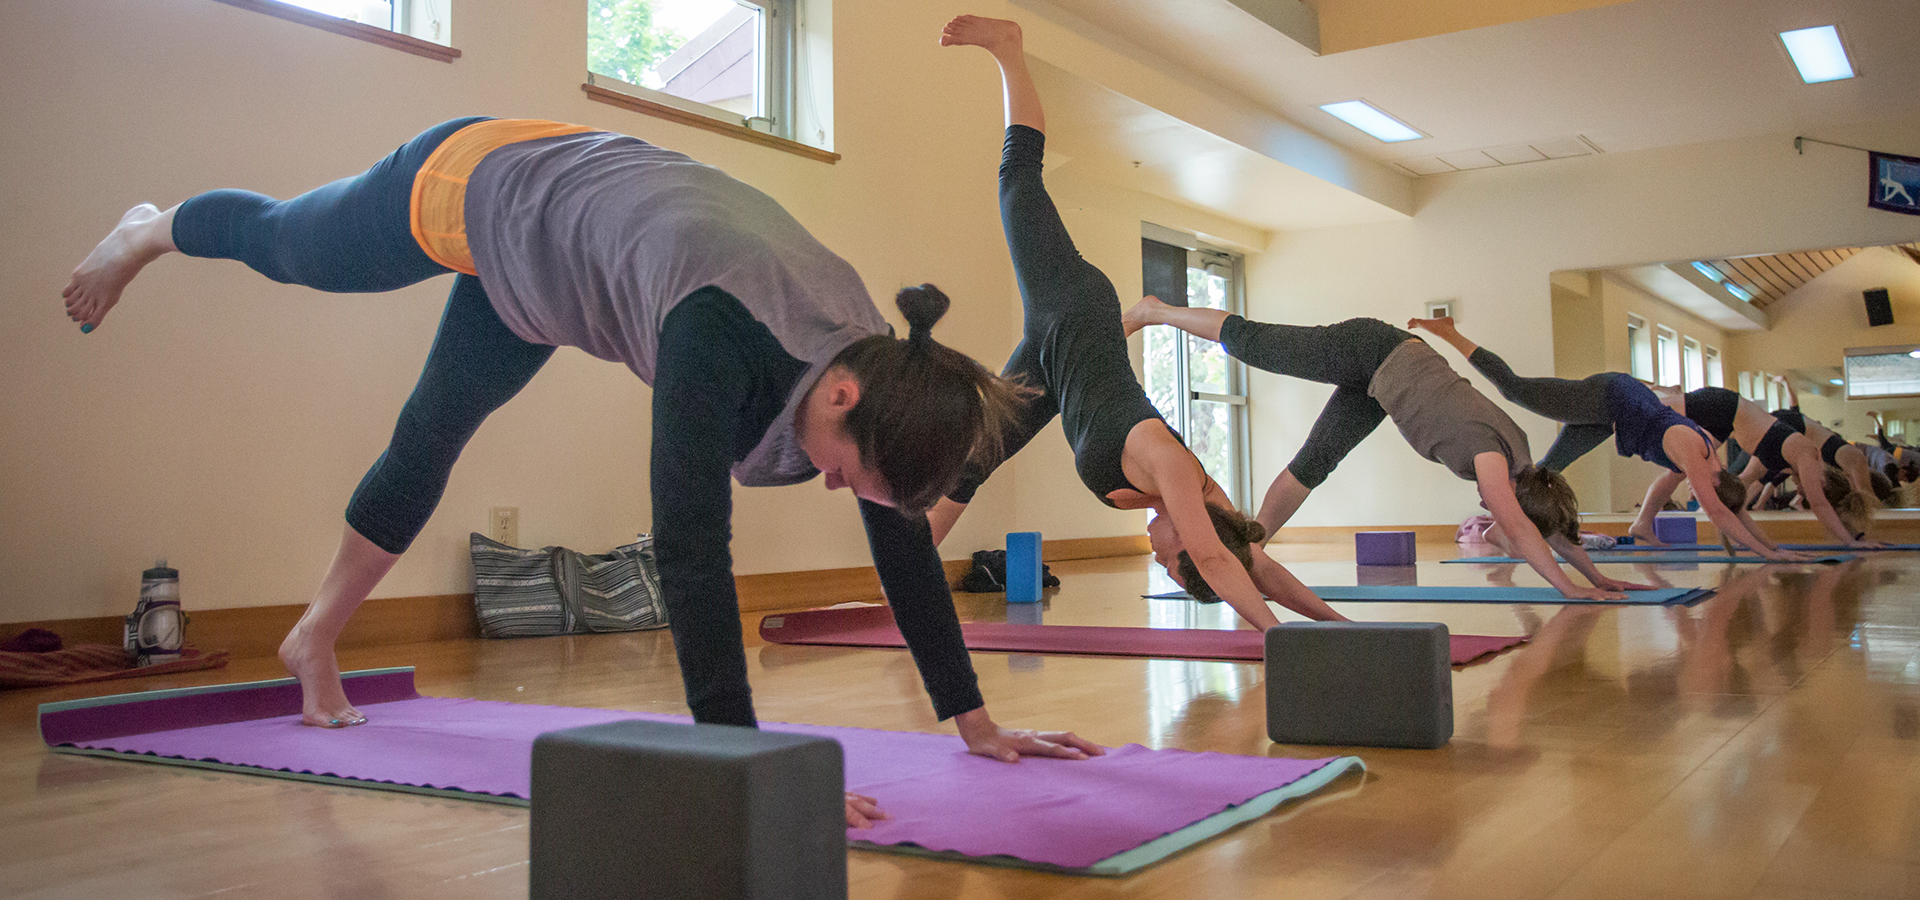 Yoga Selection - Restorative standing poses are the main focus of this  weeks intermediate class on Yoga Selection. The class can be completed in  30 minutes and relies on minimal yoga props.